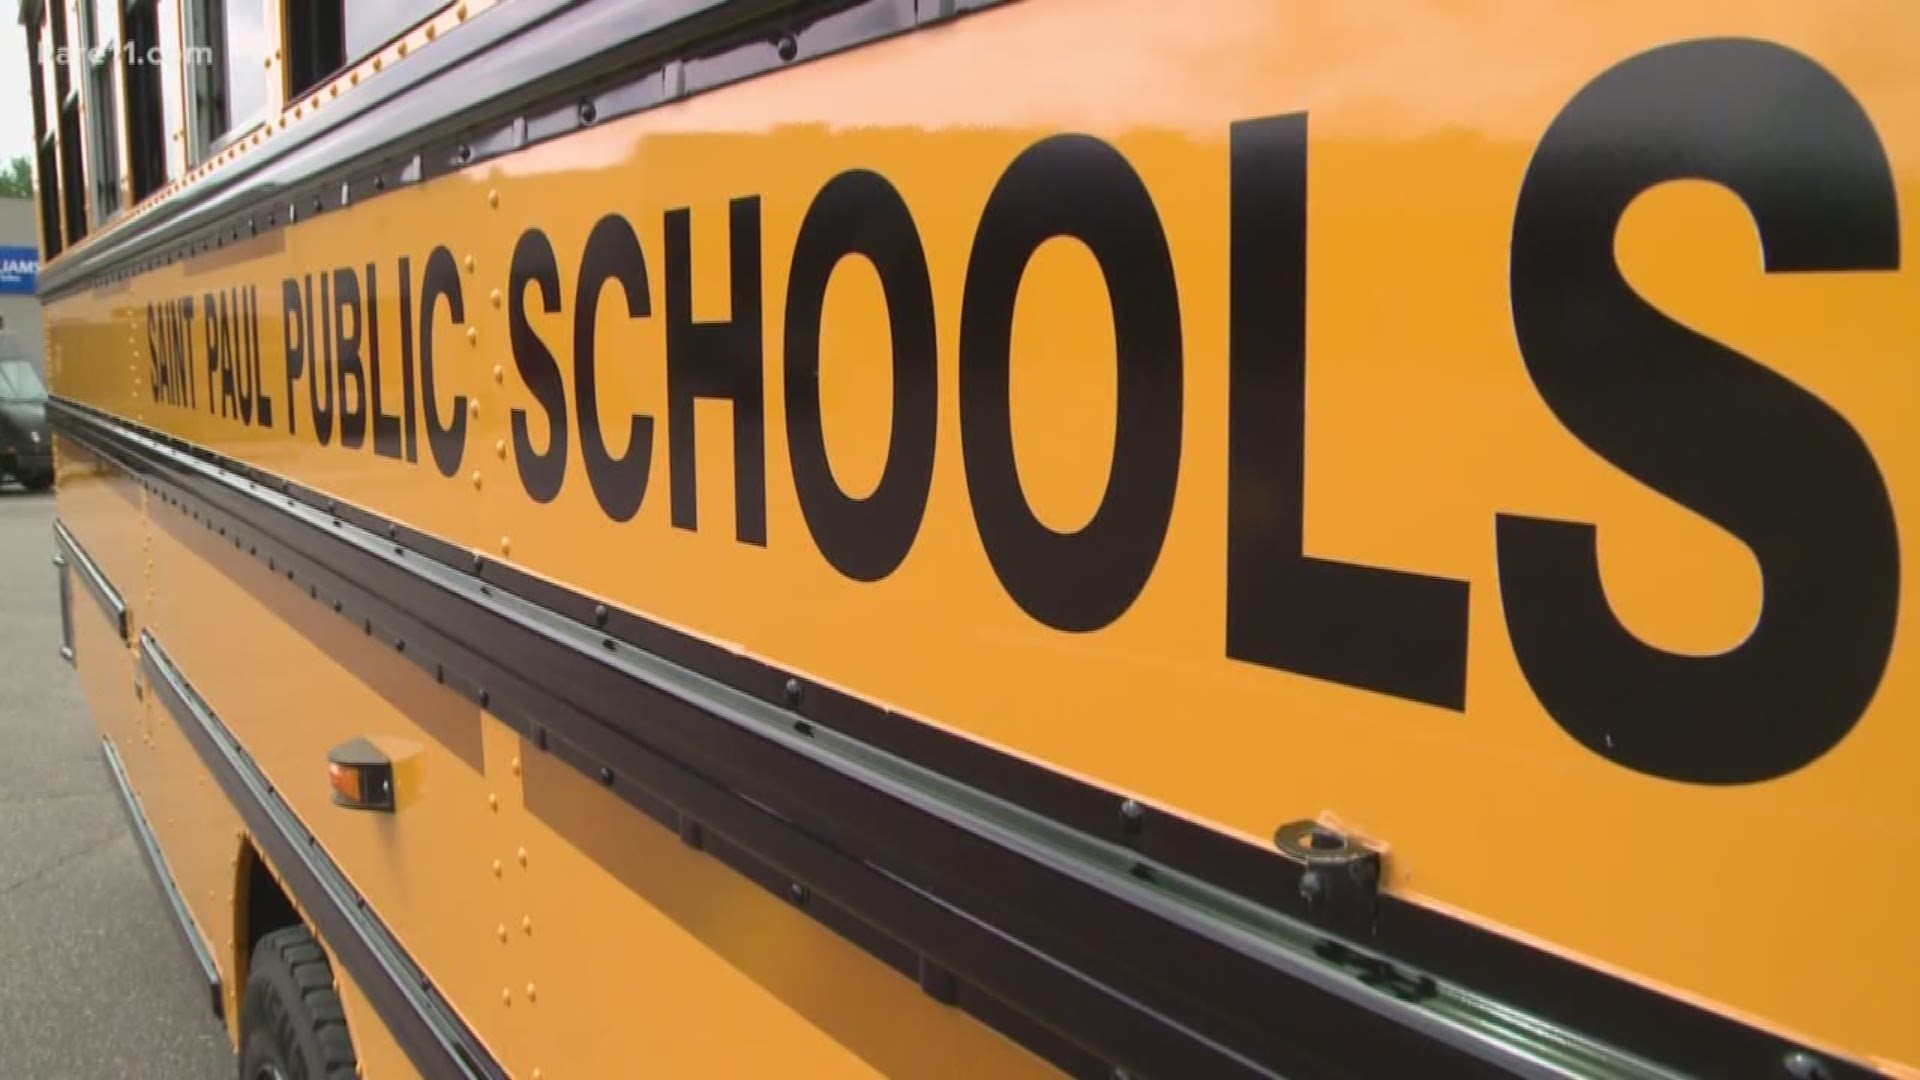 St. Paul's Public School leaders say to be comfortable for the start of the school year, they need 50 more drivers.